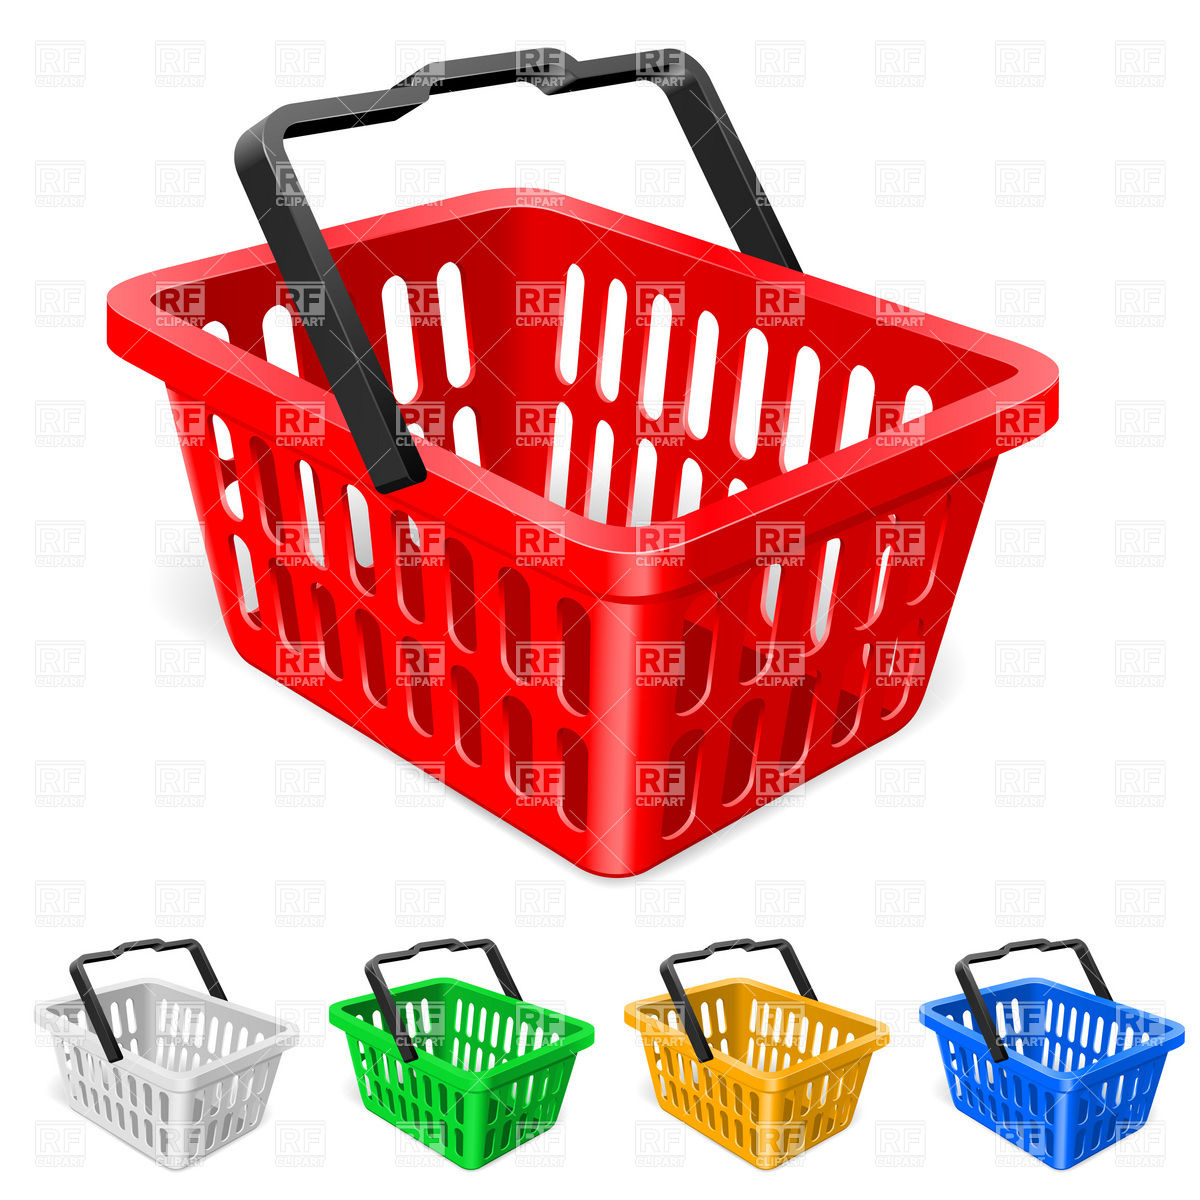 Plastic Shopping Basket 7640 Objects Download Royalty Free Vector    